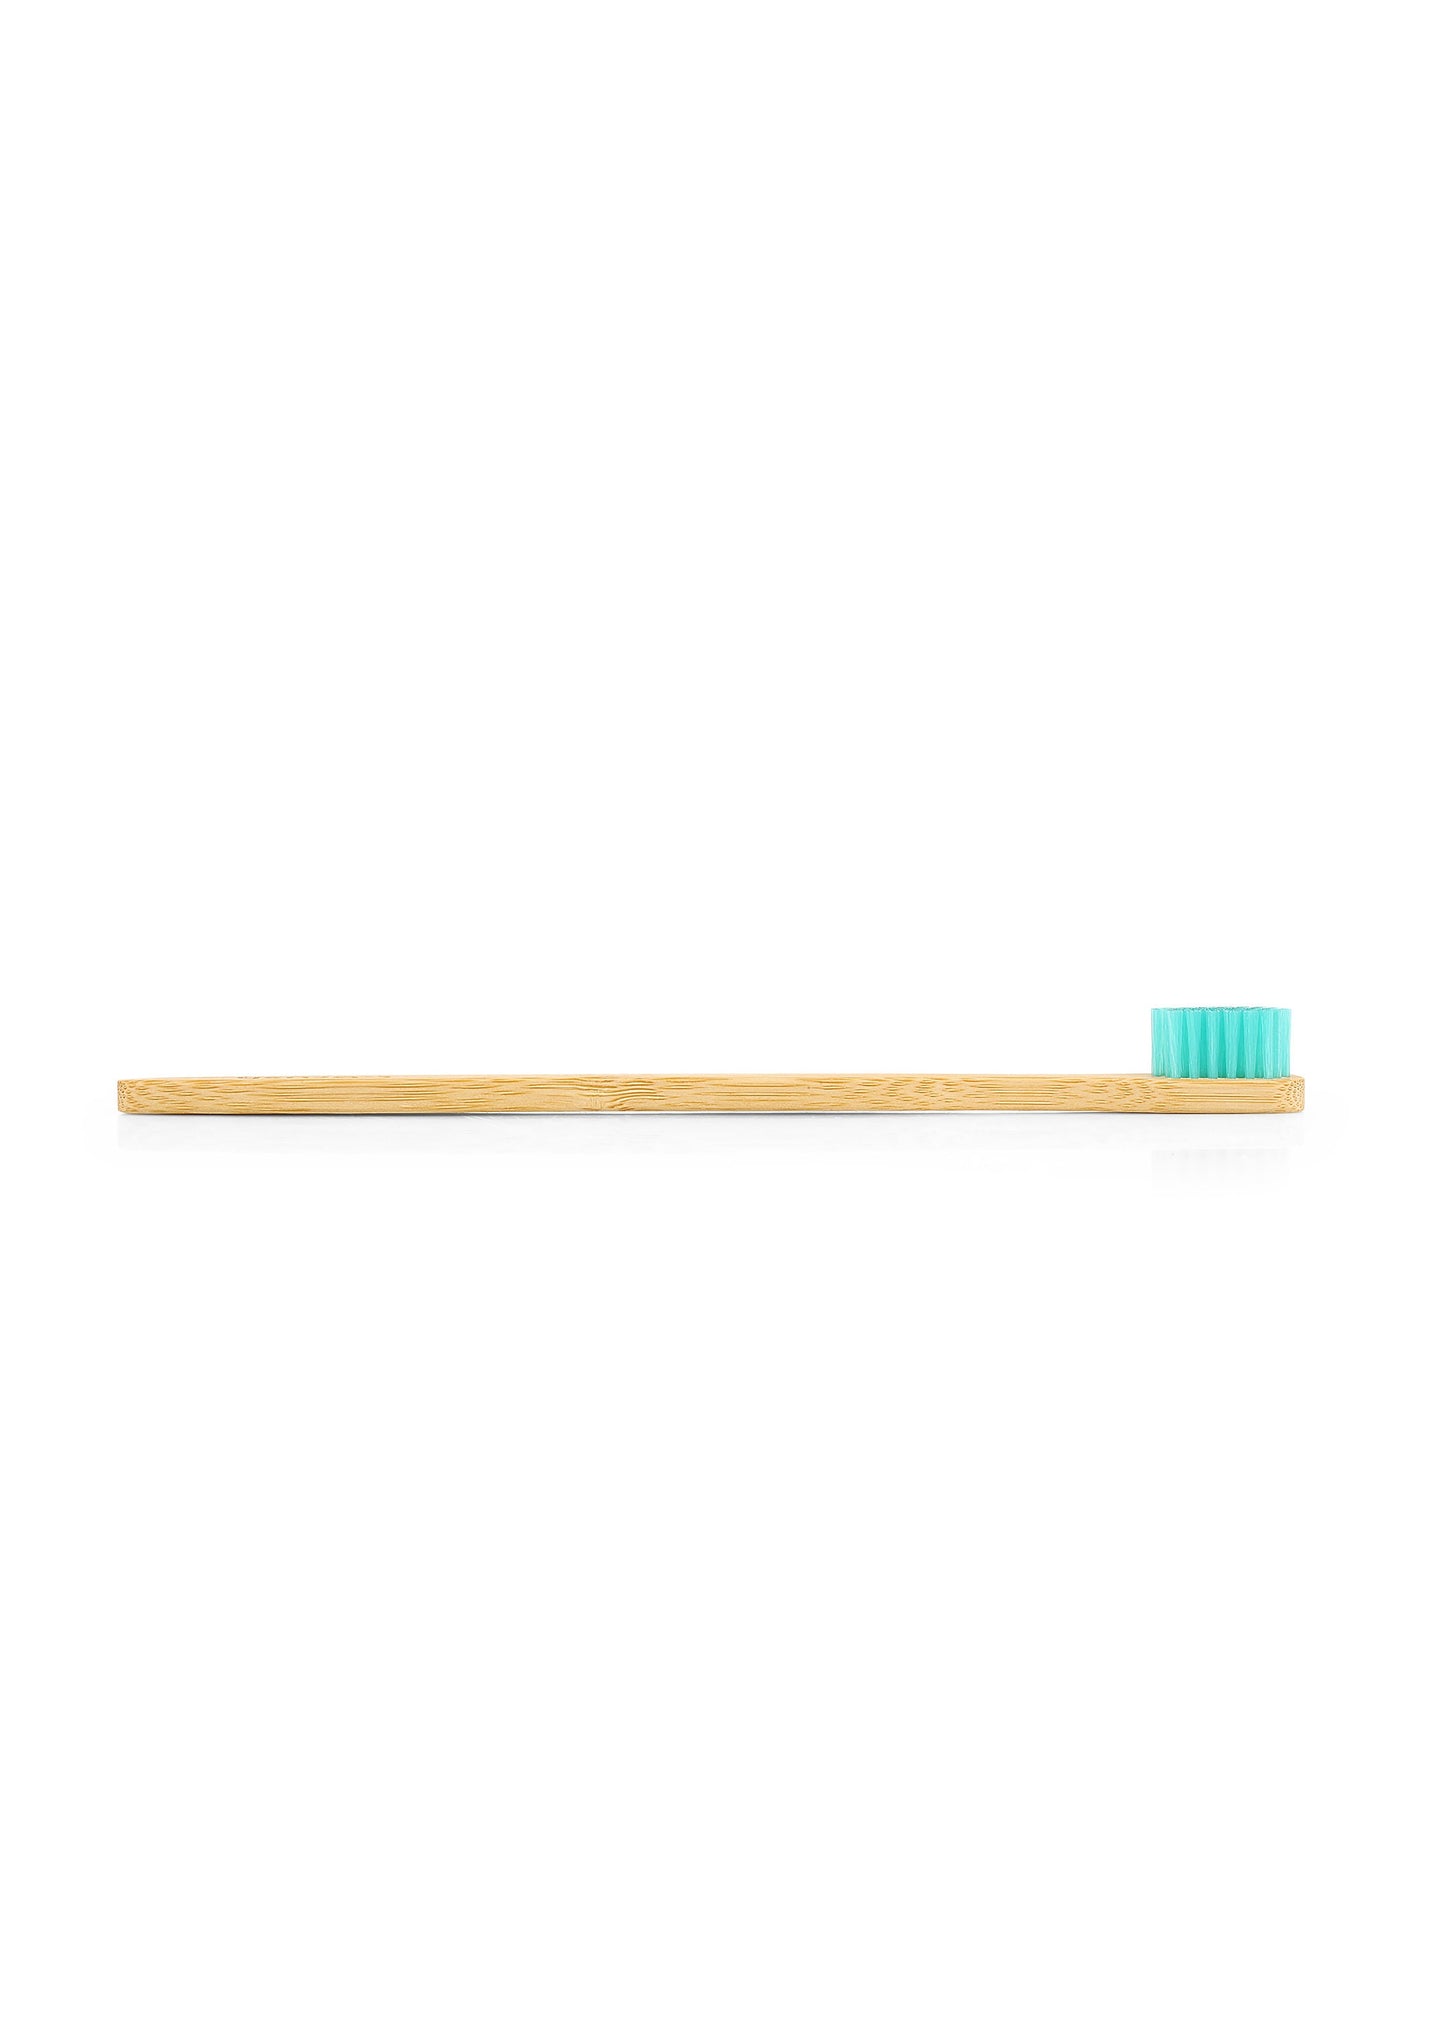 T-Brush Bamboo Toothbrush Medium Hard 4 Pieces - Dupont Bristles - The Best Duo = Dupont + Bamboo - Gift For Christmas - Natural Toothbrush